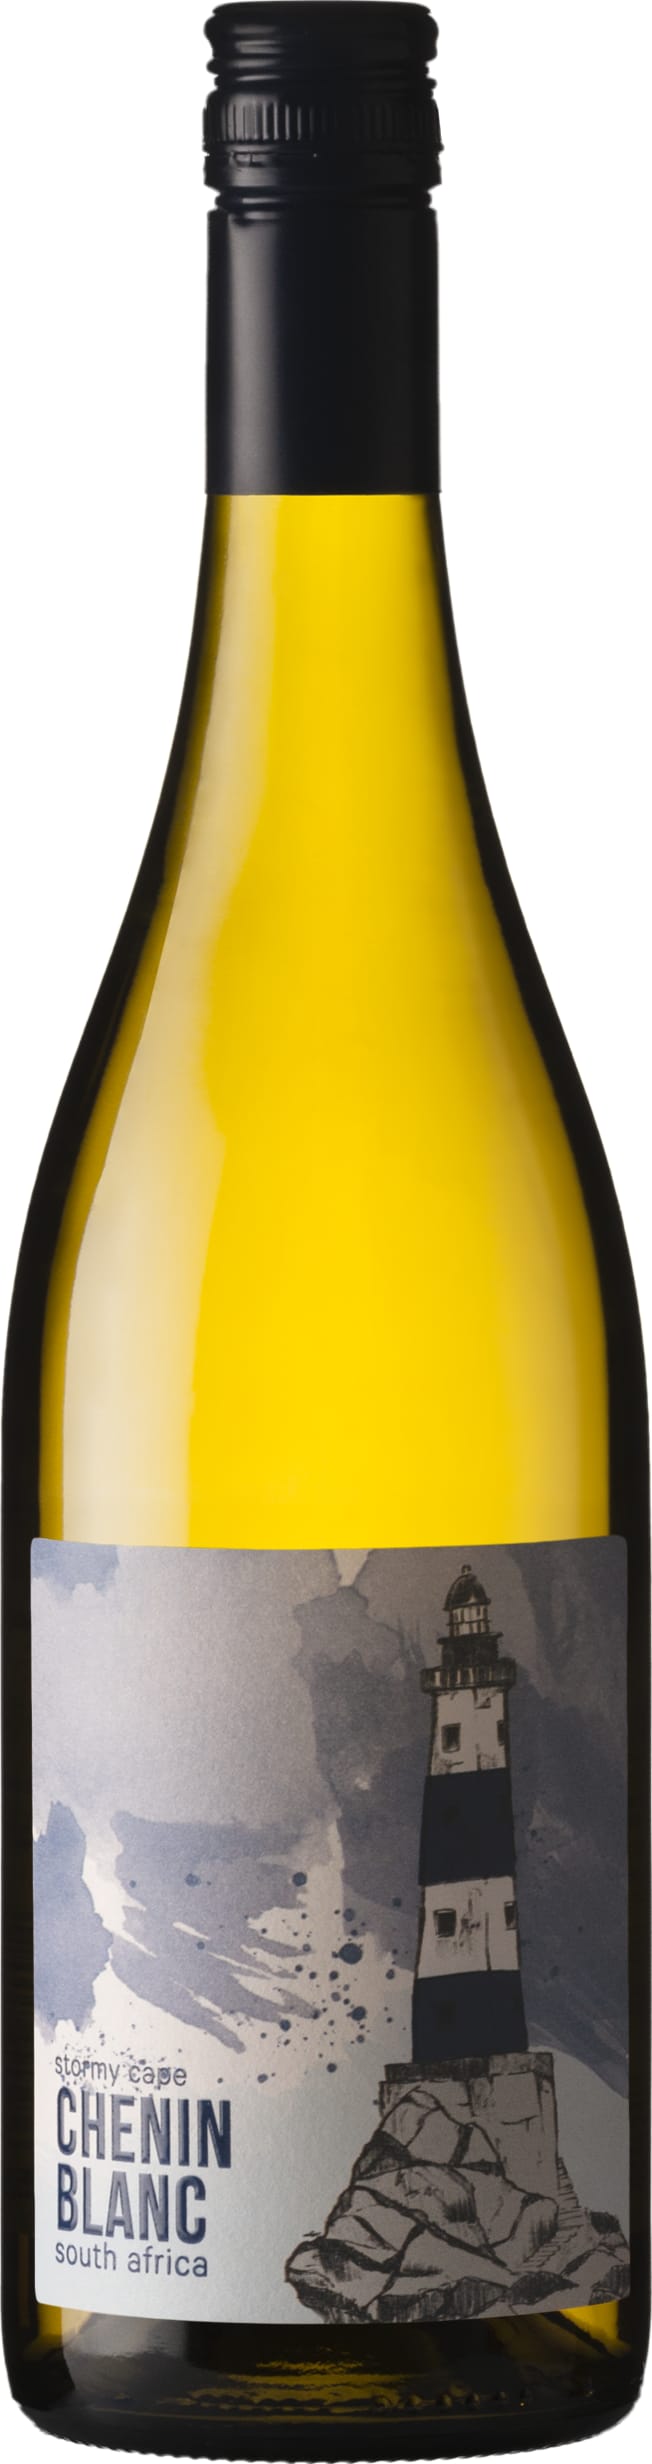 Stormy Cape Chenin Blanc 2022 75cl - Buy Stormy Cape Wines from GREAT WINES DIRECT wine shop